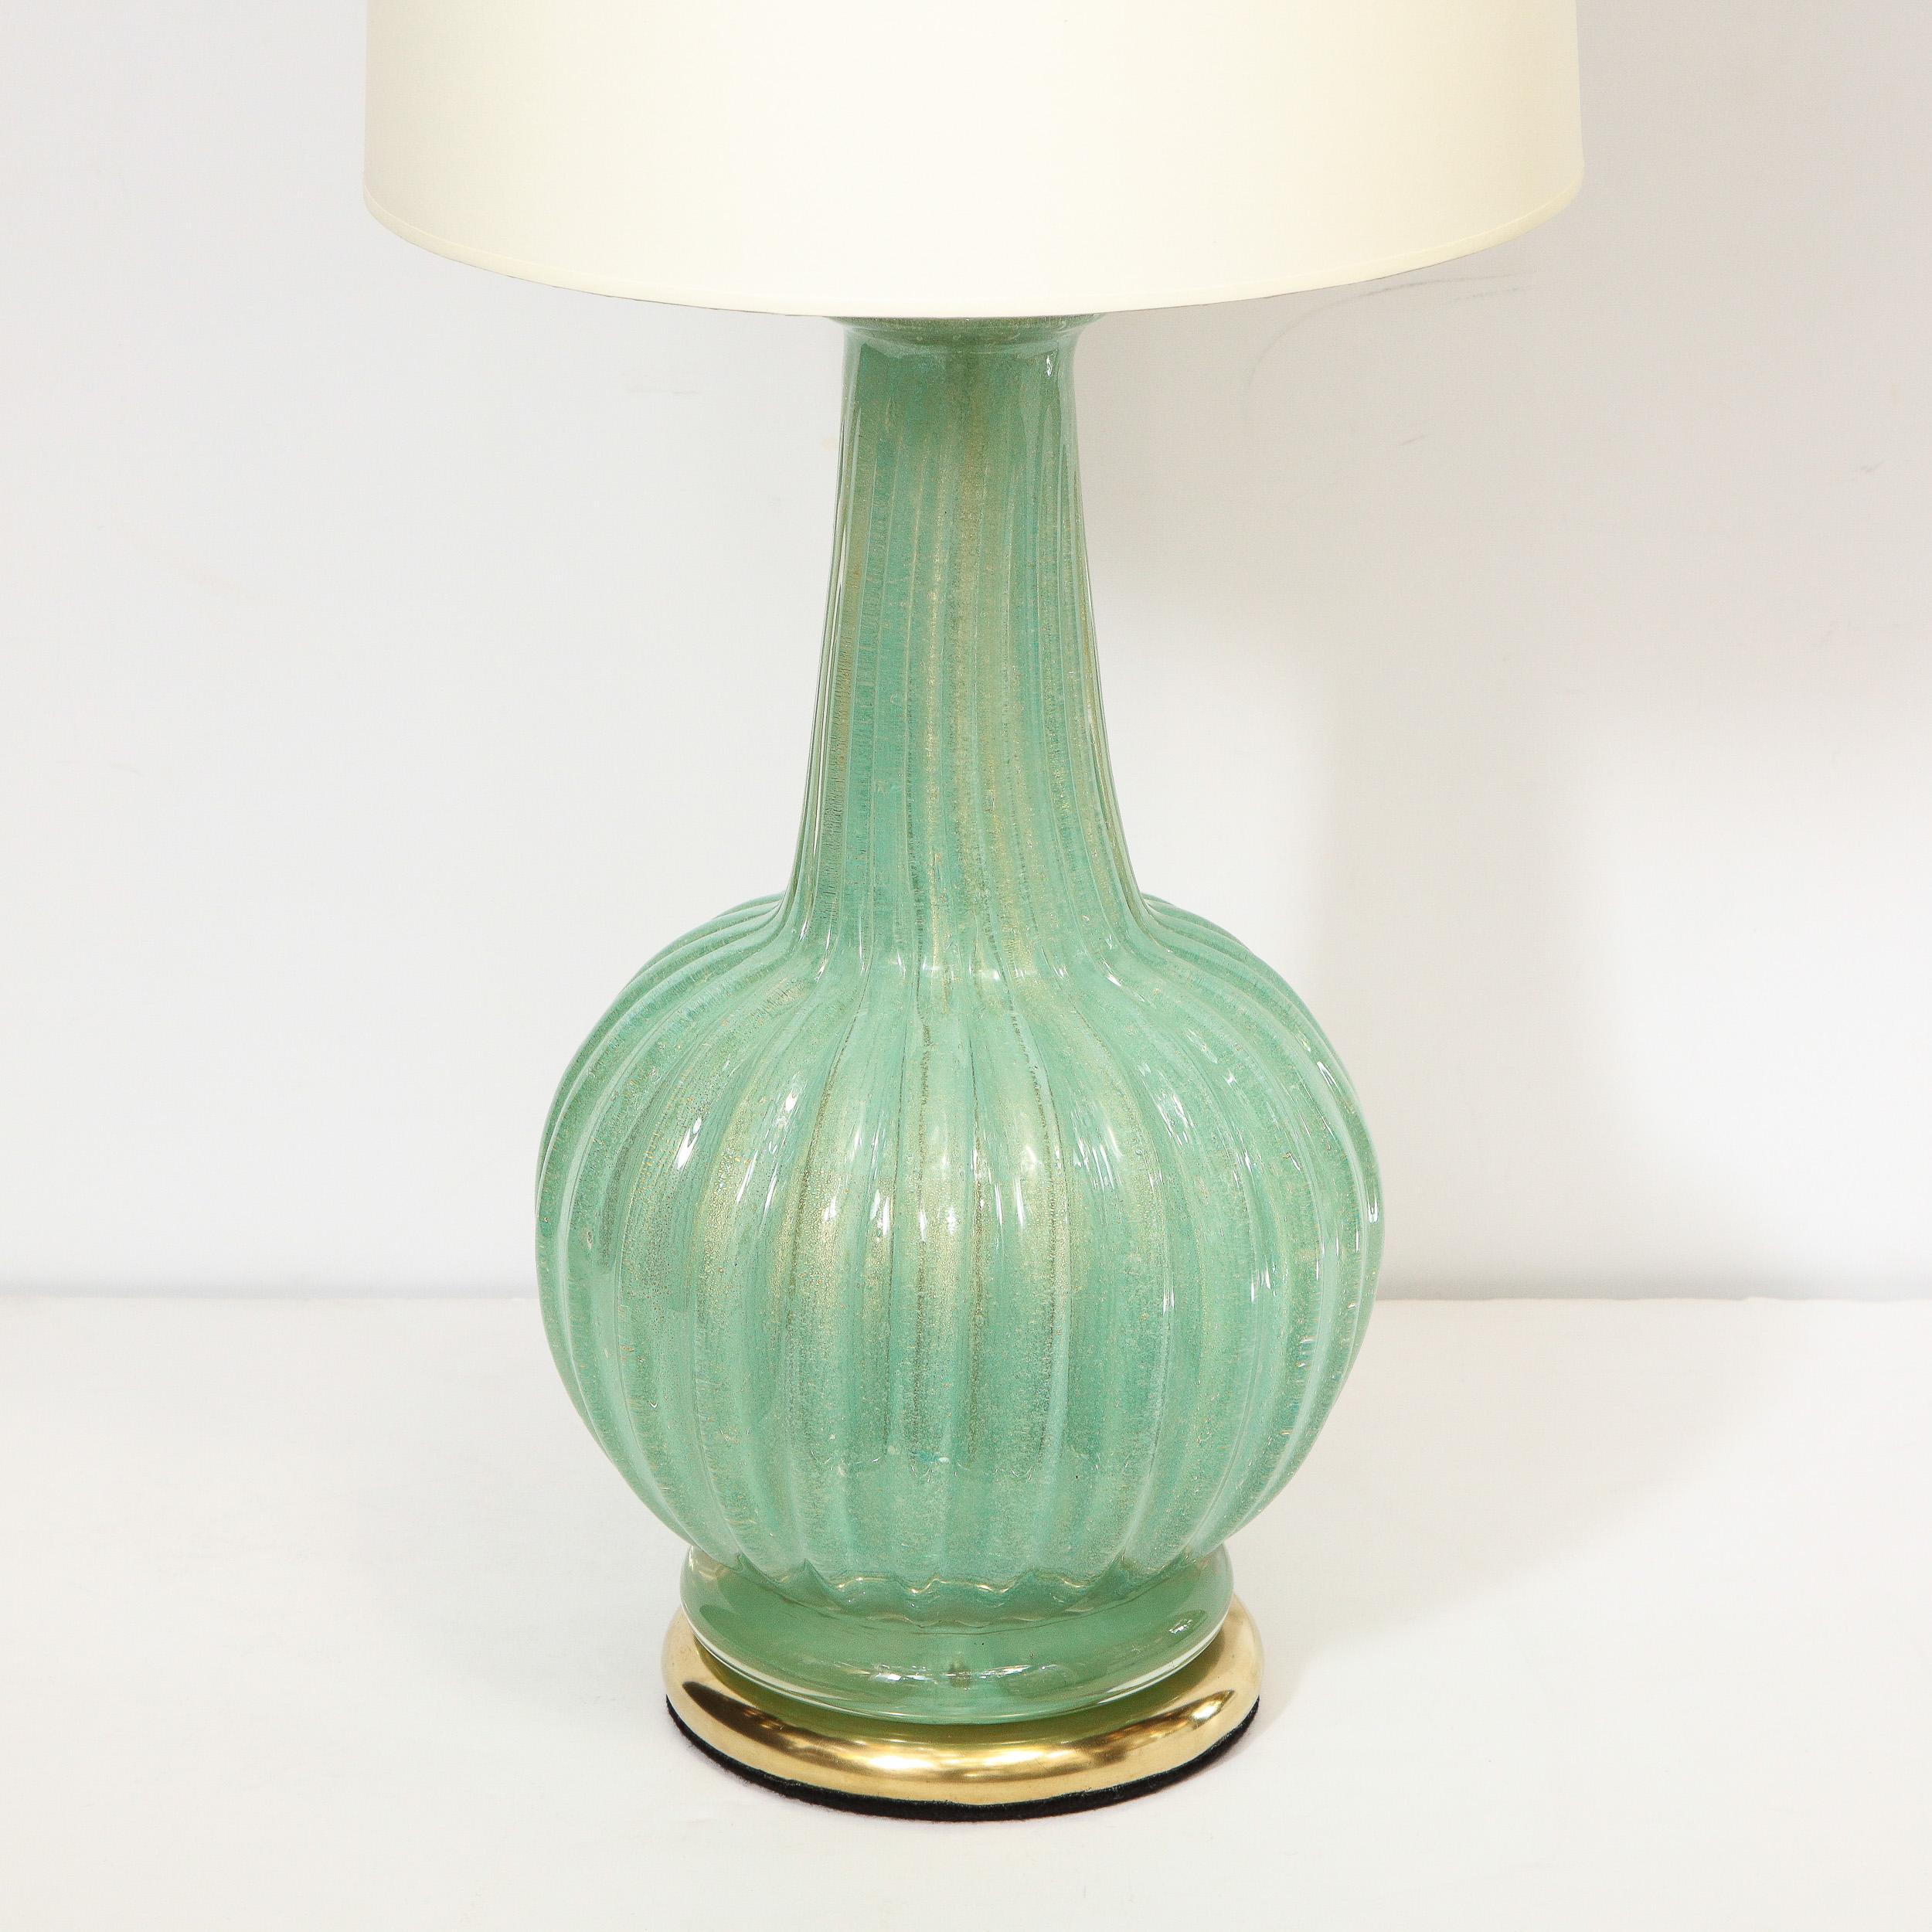 Italian Pair of Midcentury Channeled Table Lamps with Brass Detailing, Barovier e Toso